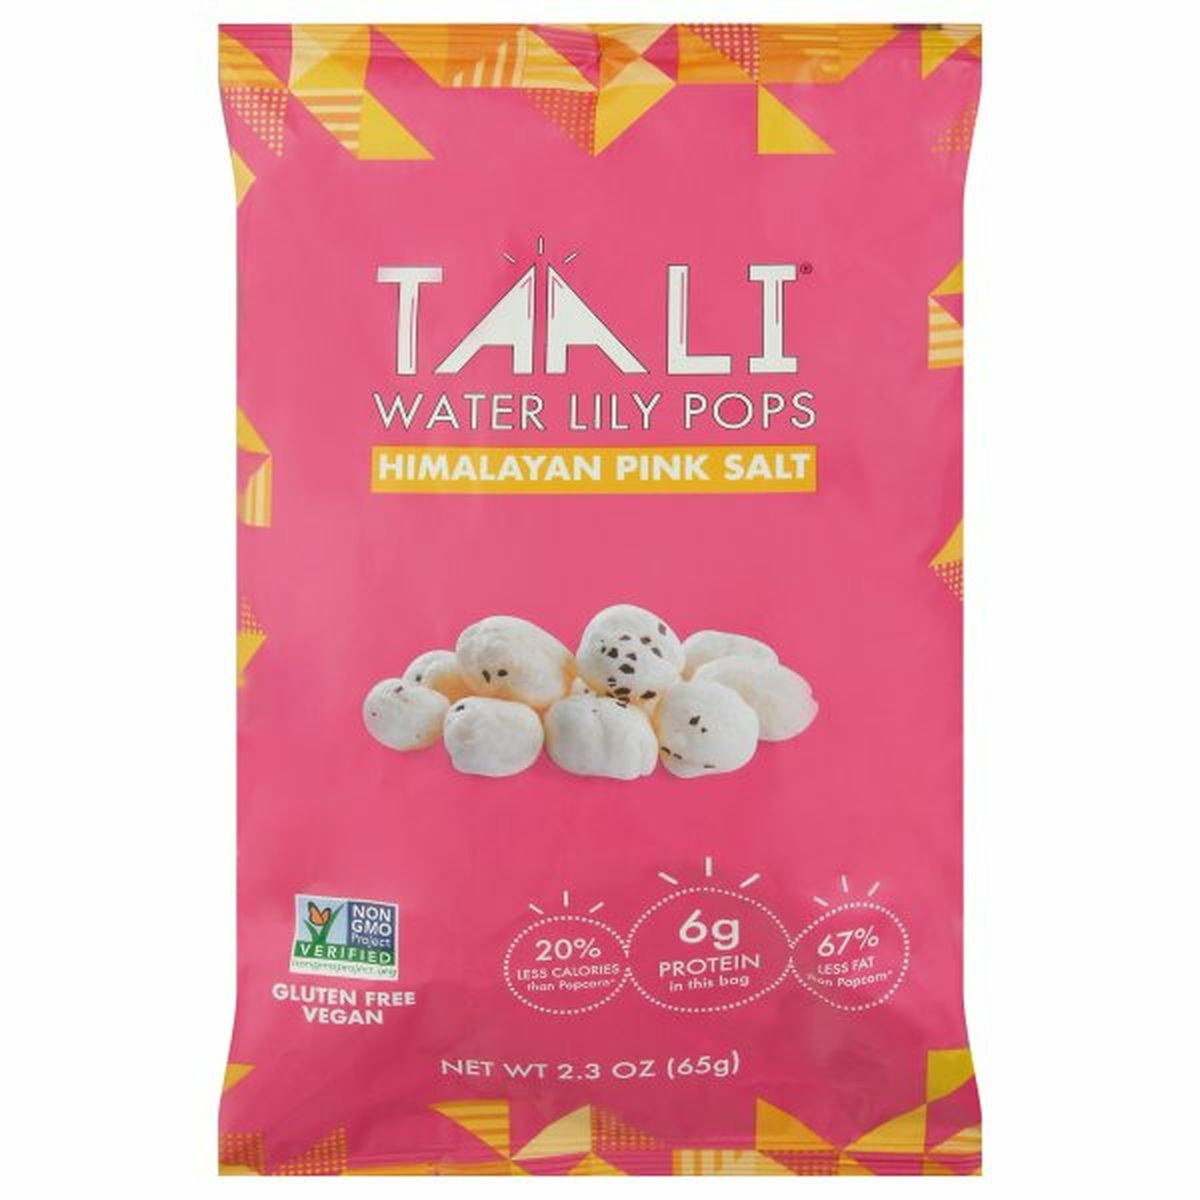 Calories in Taali Water Lily Pops, Himalayan Pink Salt